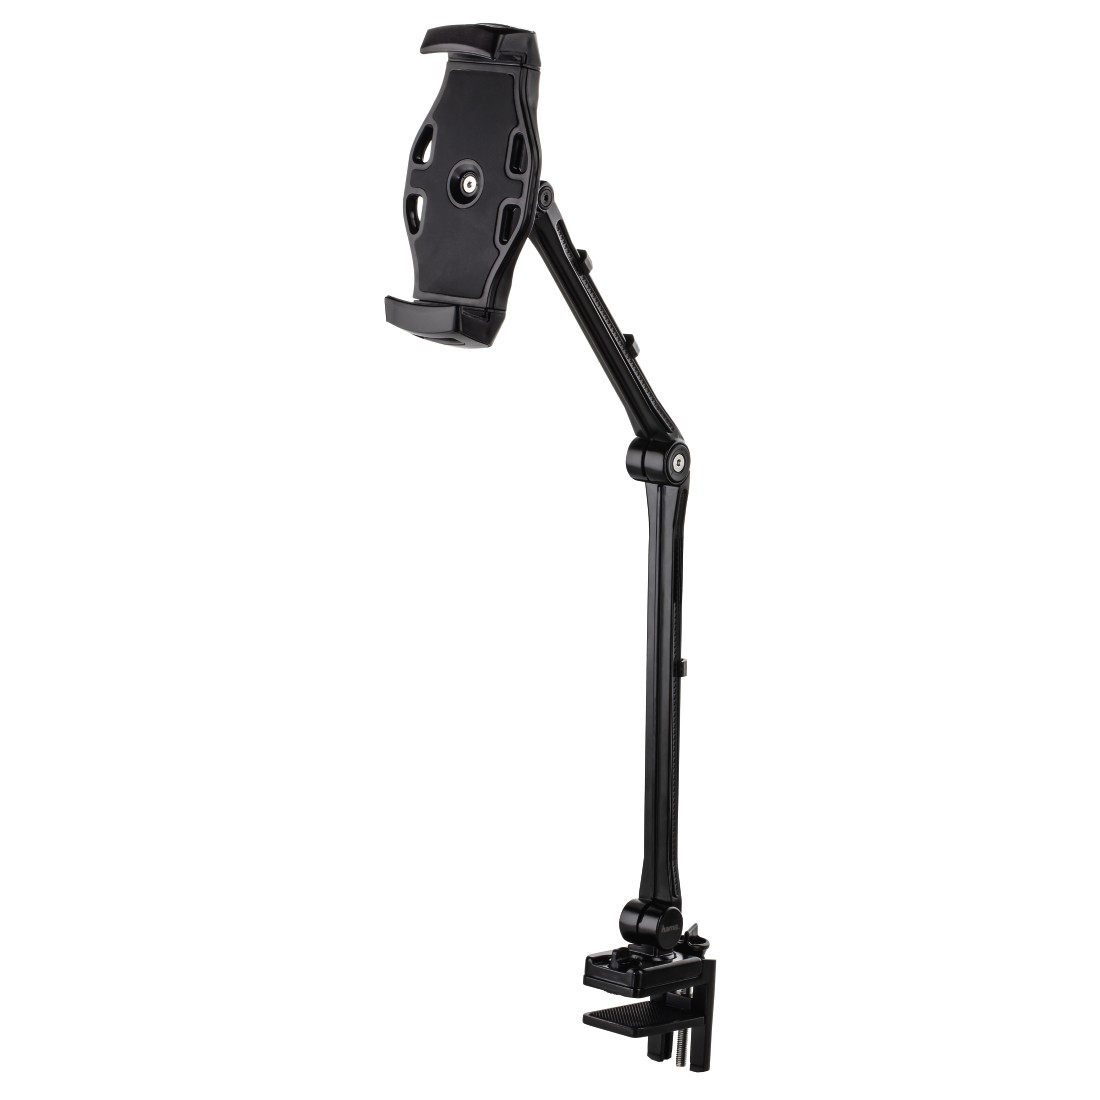 00182543 Hama Tablet Holder With Arm, Secure Lamp To Tablet